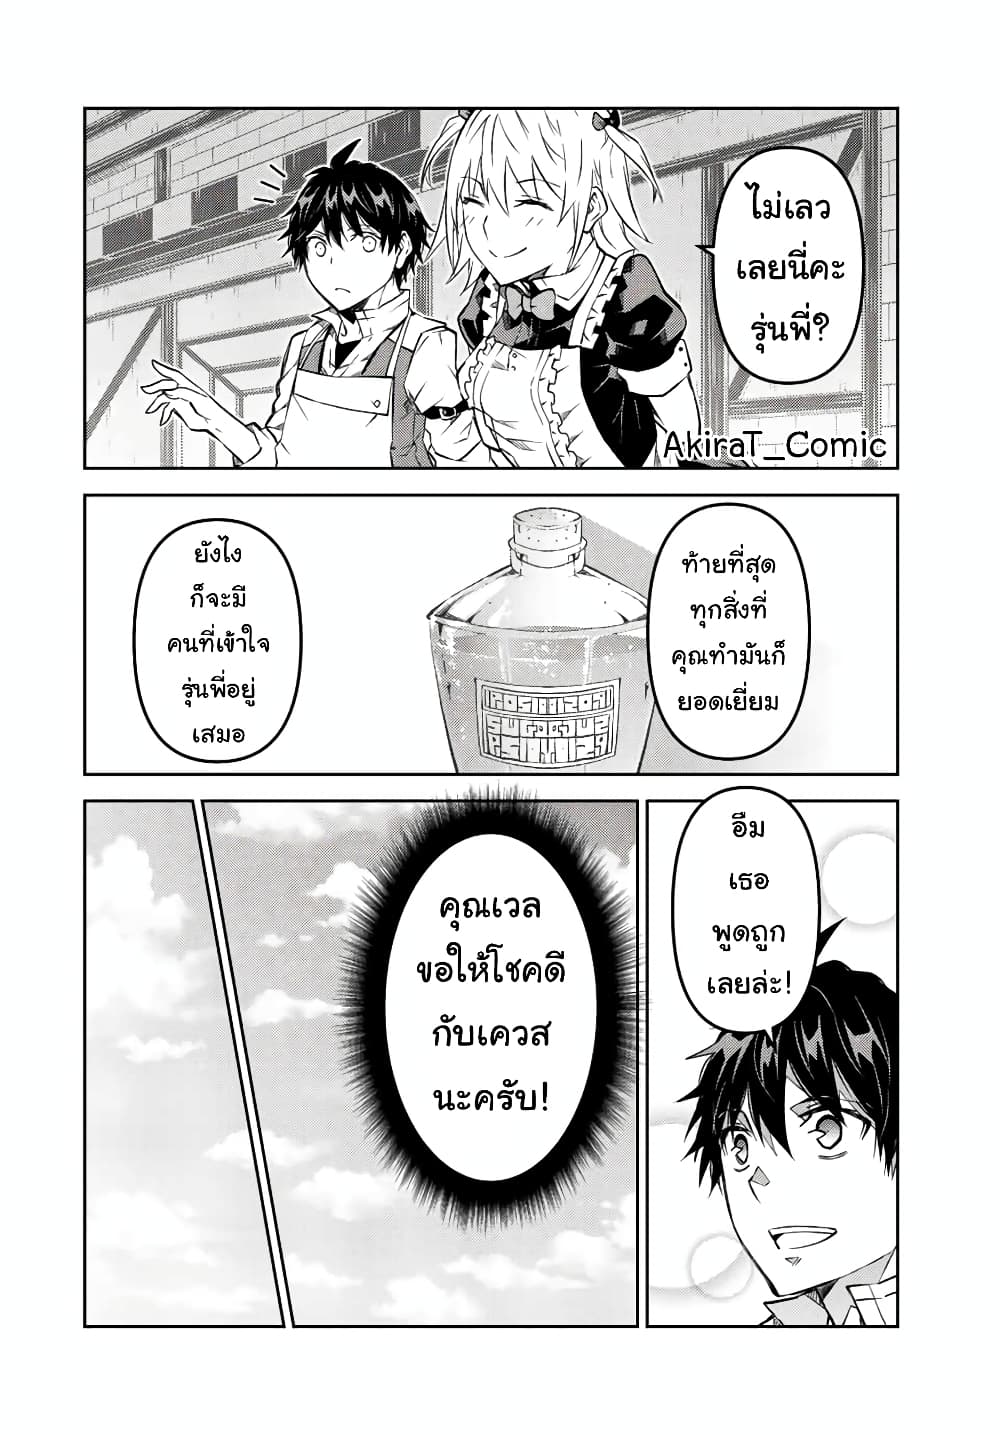 The Weakest Occupation "Blacksmith", but It's Actually the Strongest ช่างตีเหล็กอาชีพกระจอก? 101-101